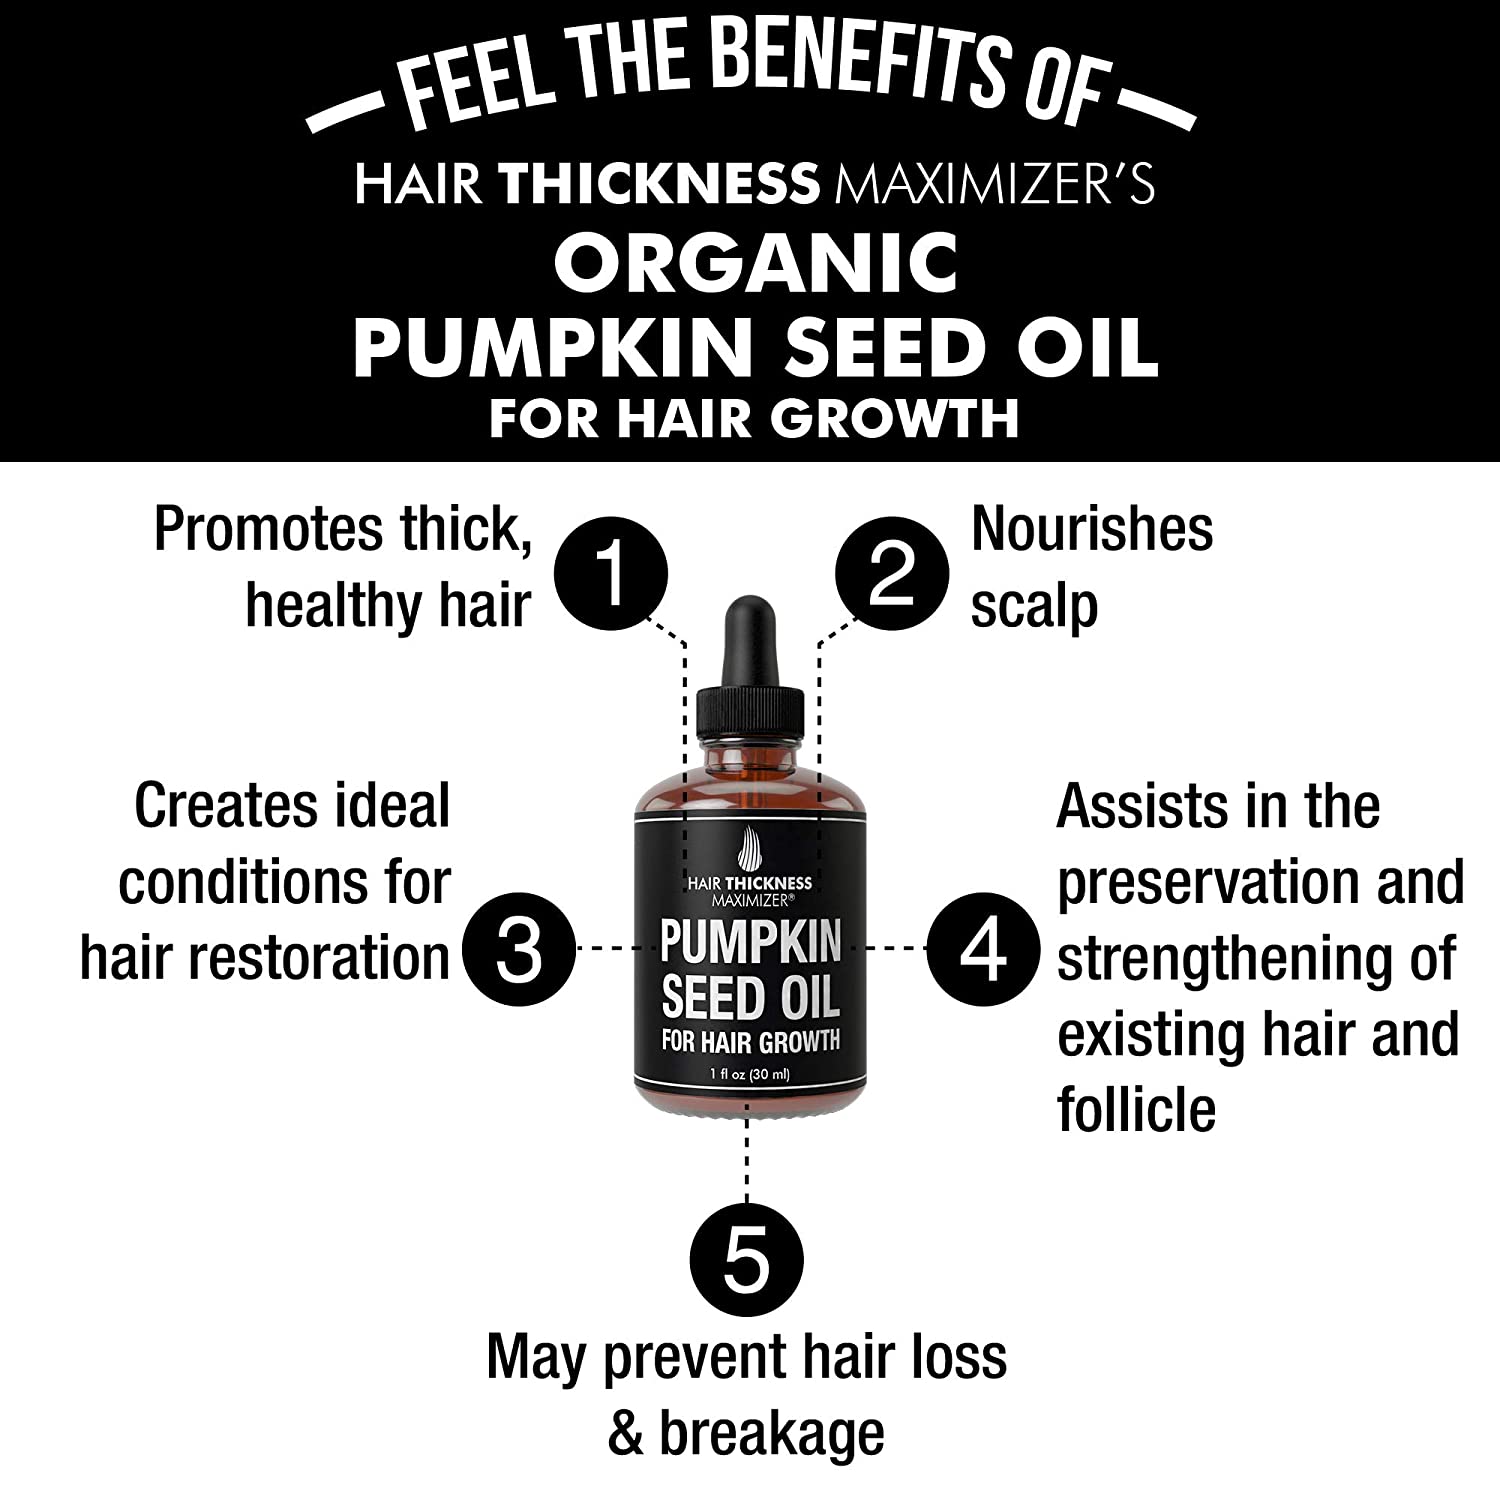 Organic Pumpkin Seed Oil For Hair Growth,Salon- Hair Thickness Maximizer. Pure, Cold Pressed, Vegan Pumpkin Seeds Extract to Stop Hair Loss For Men & Women. Hair Treatment Serum. Replenish Ha